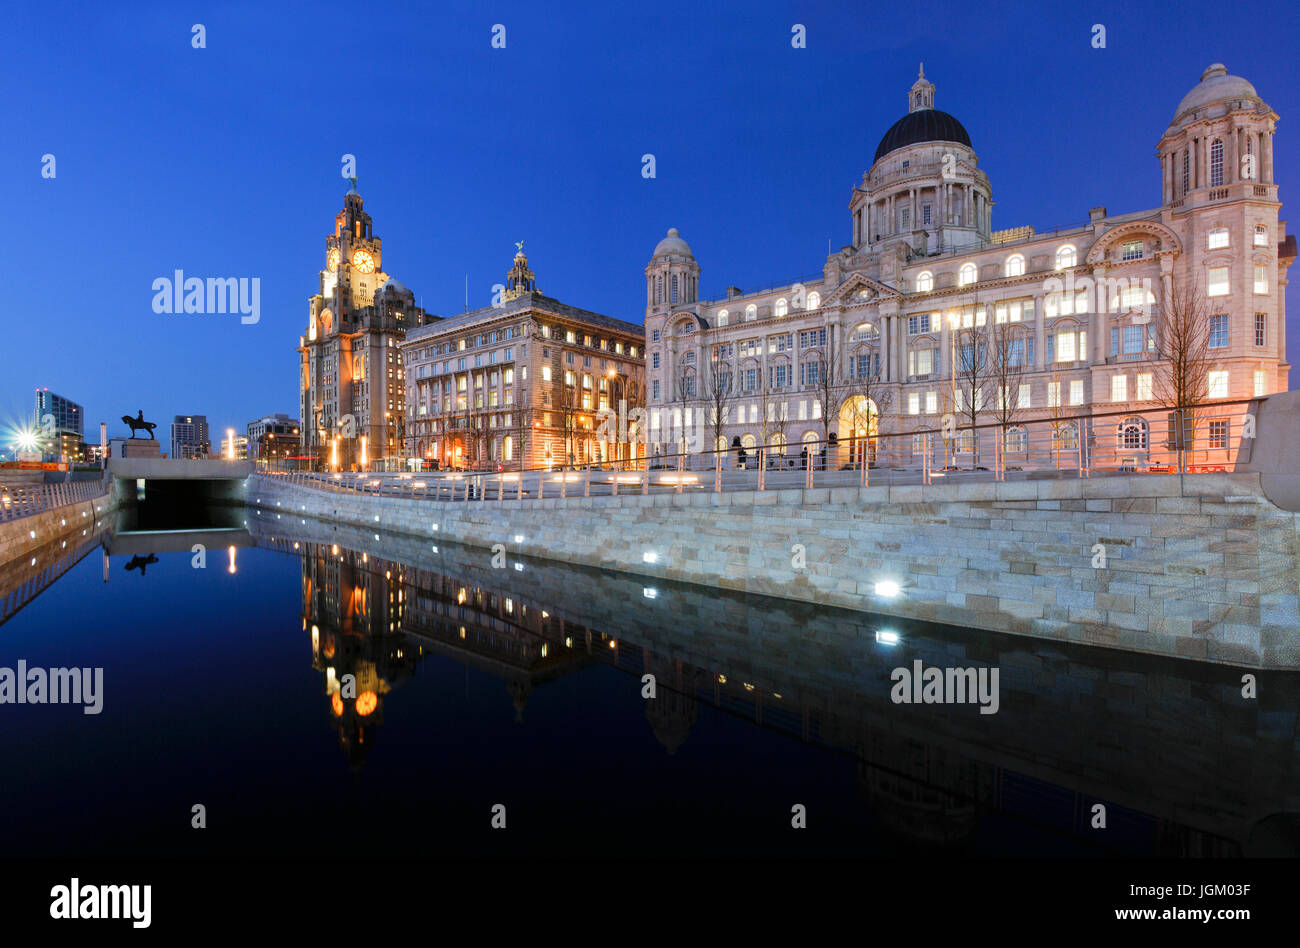 Liverpool's 'Three Graces' (left to right: Royal Liver Building, Cunard Building and Port of Liverpool Building) reflected in the canal link. Stock Photo